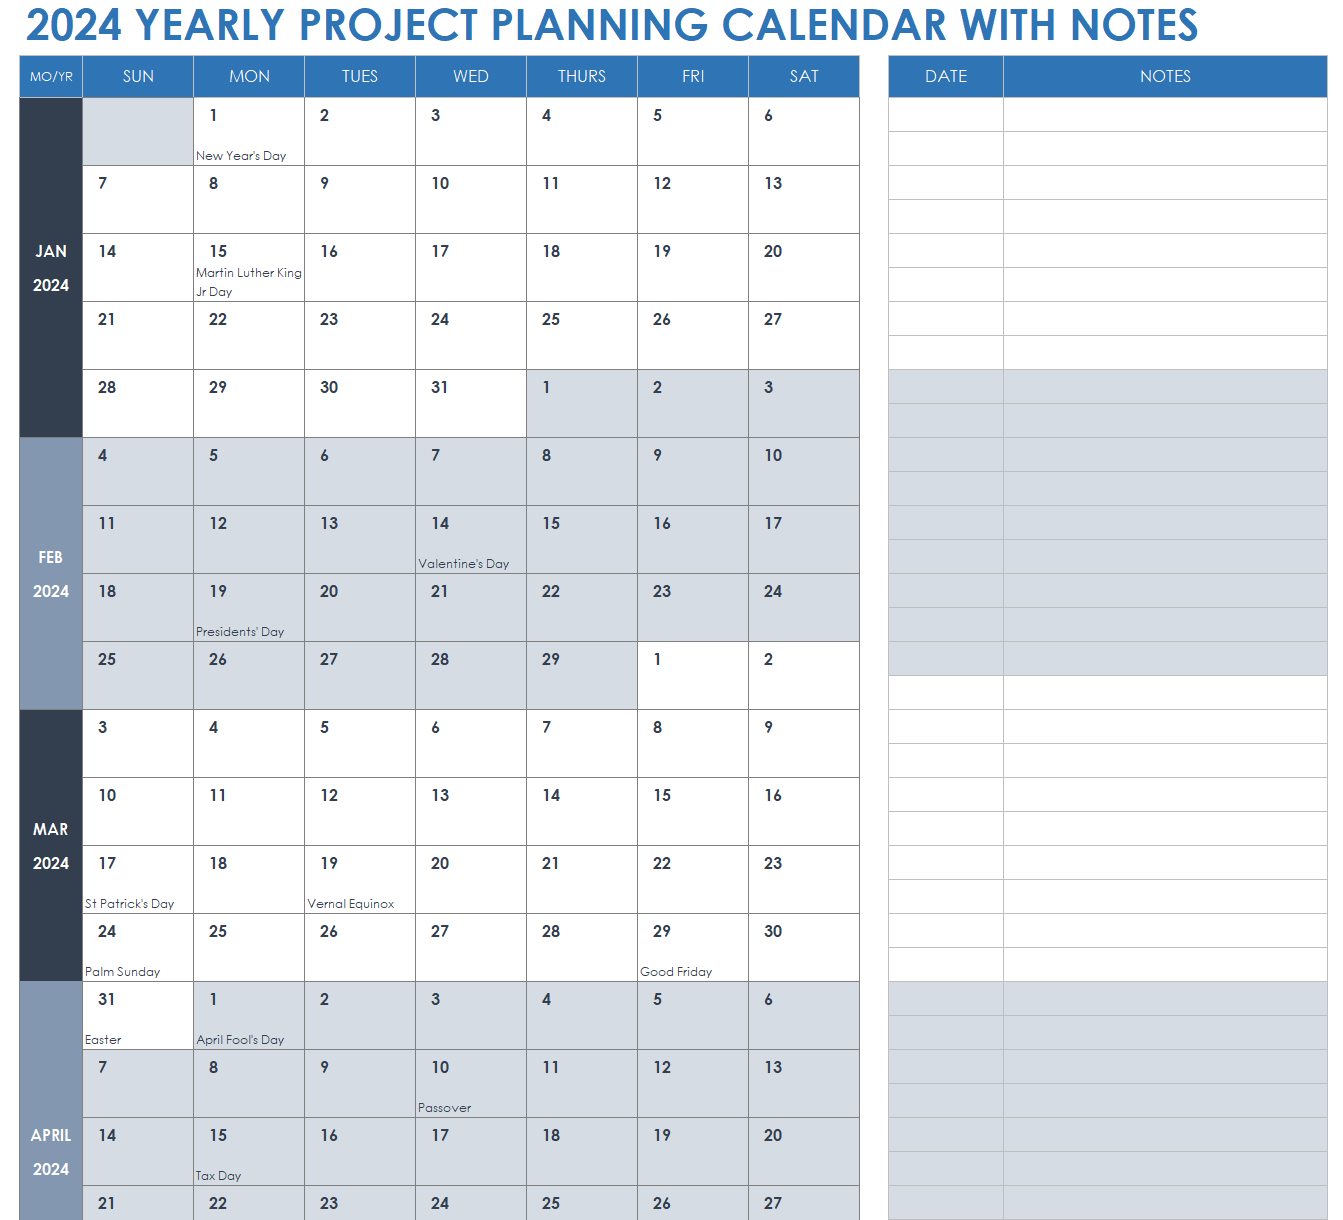 2024 Yearly Project Planning Calendar with Notes